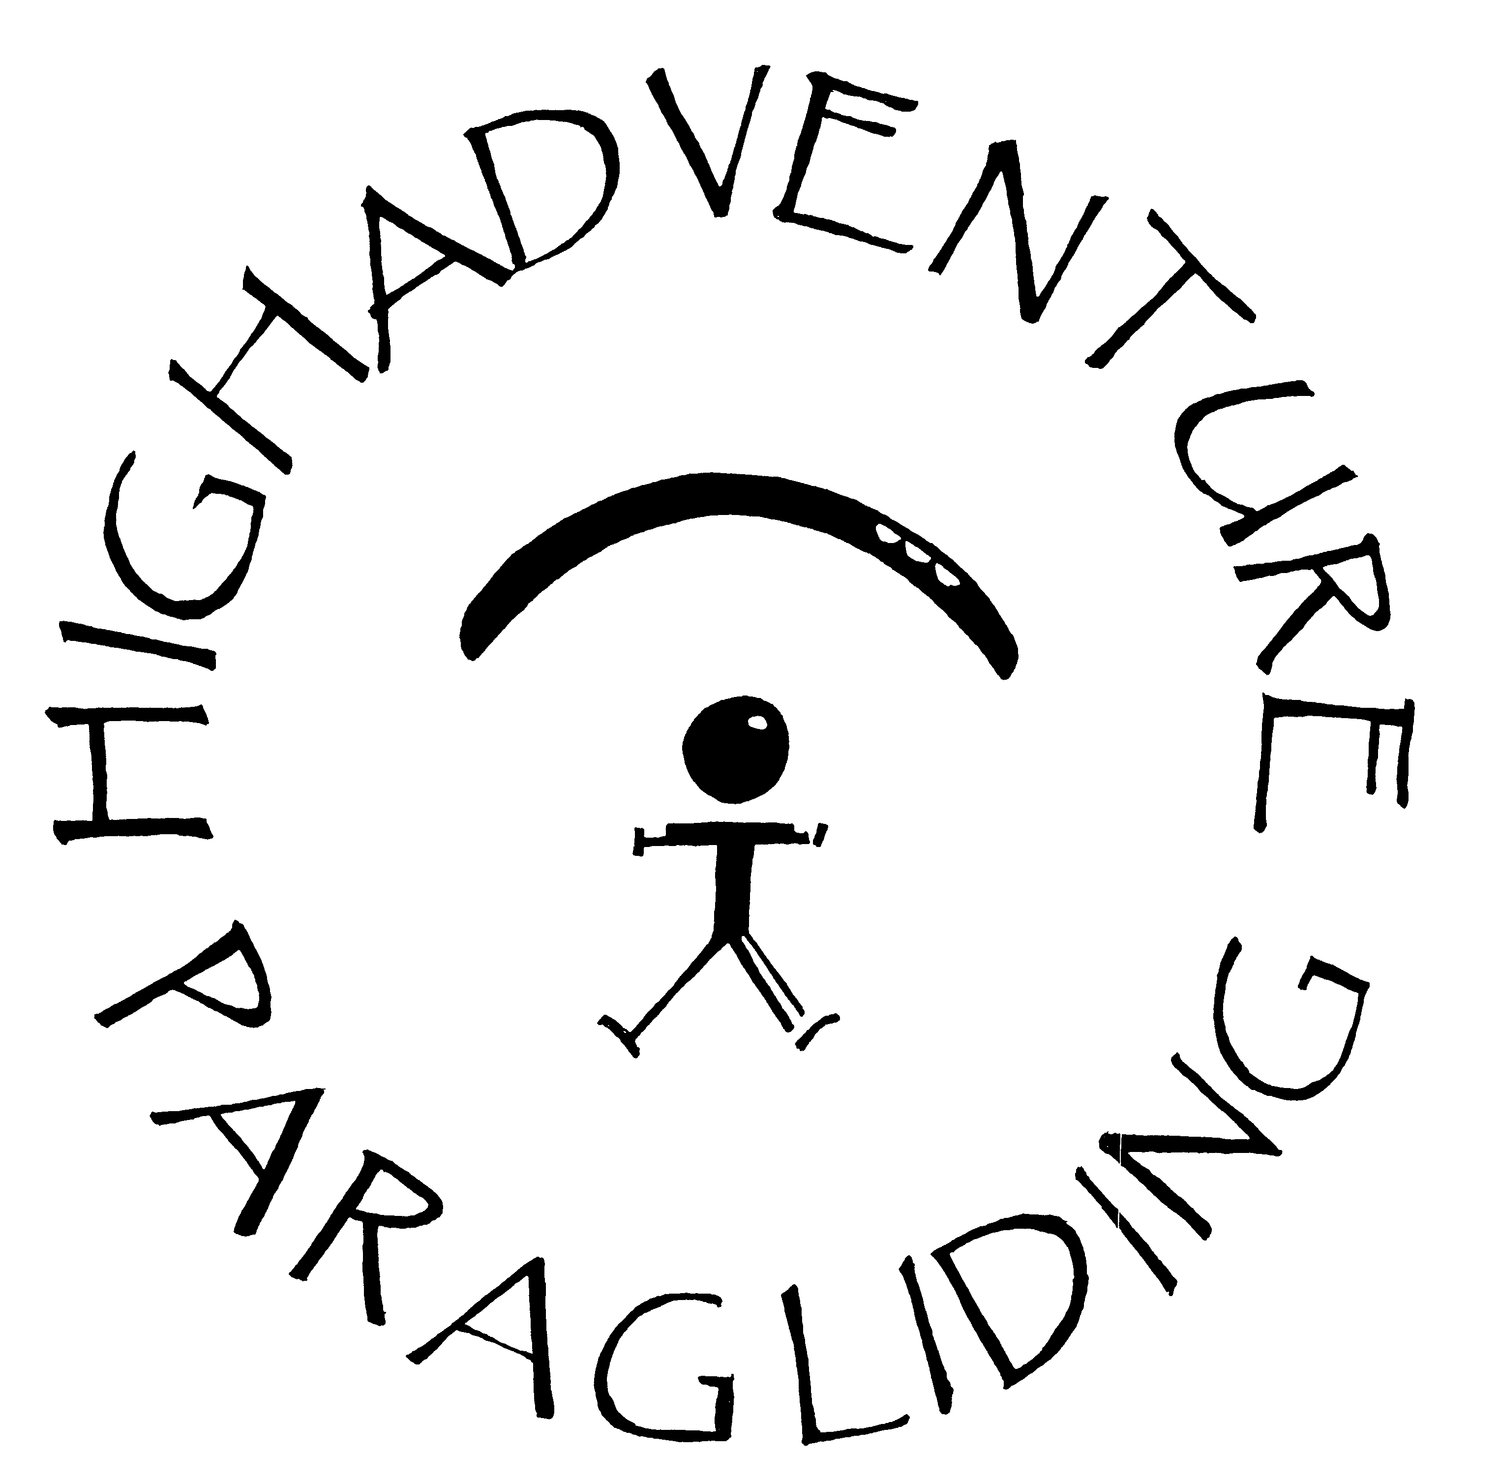 High Adventure Paragliding - Learn to paraglide on the Isle of Wight